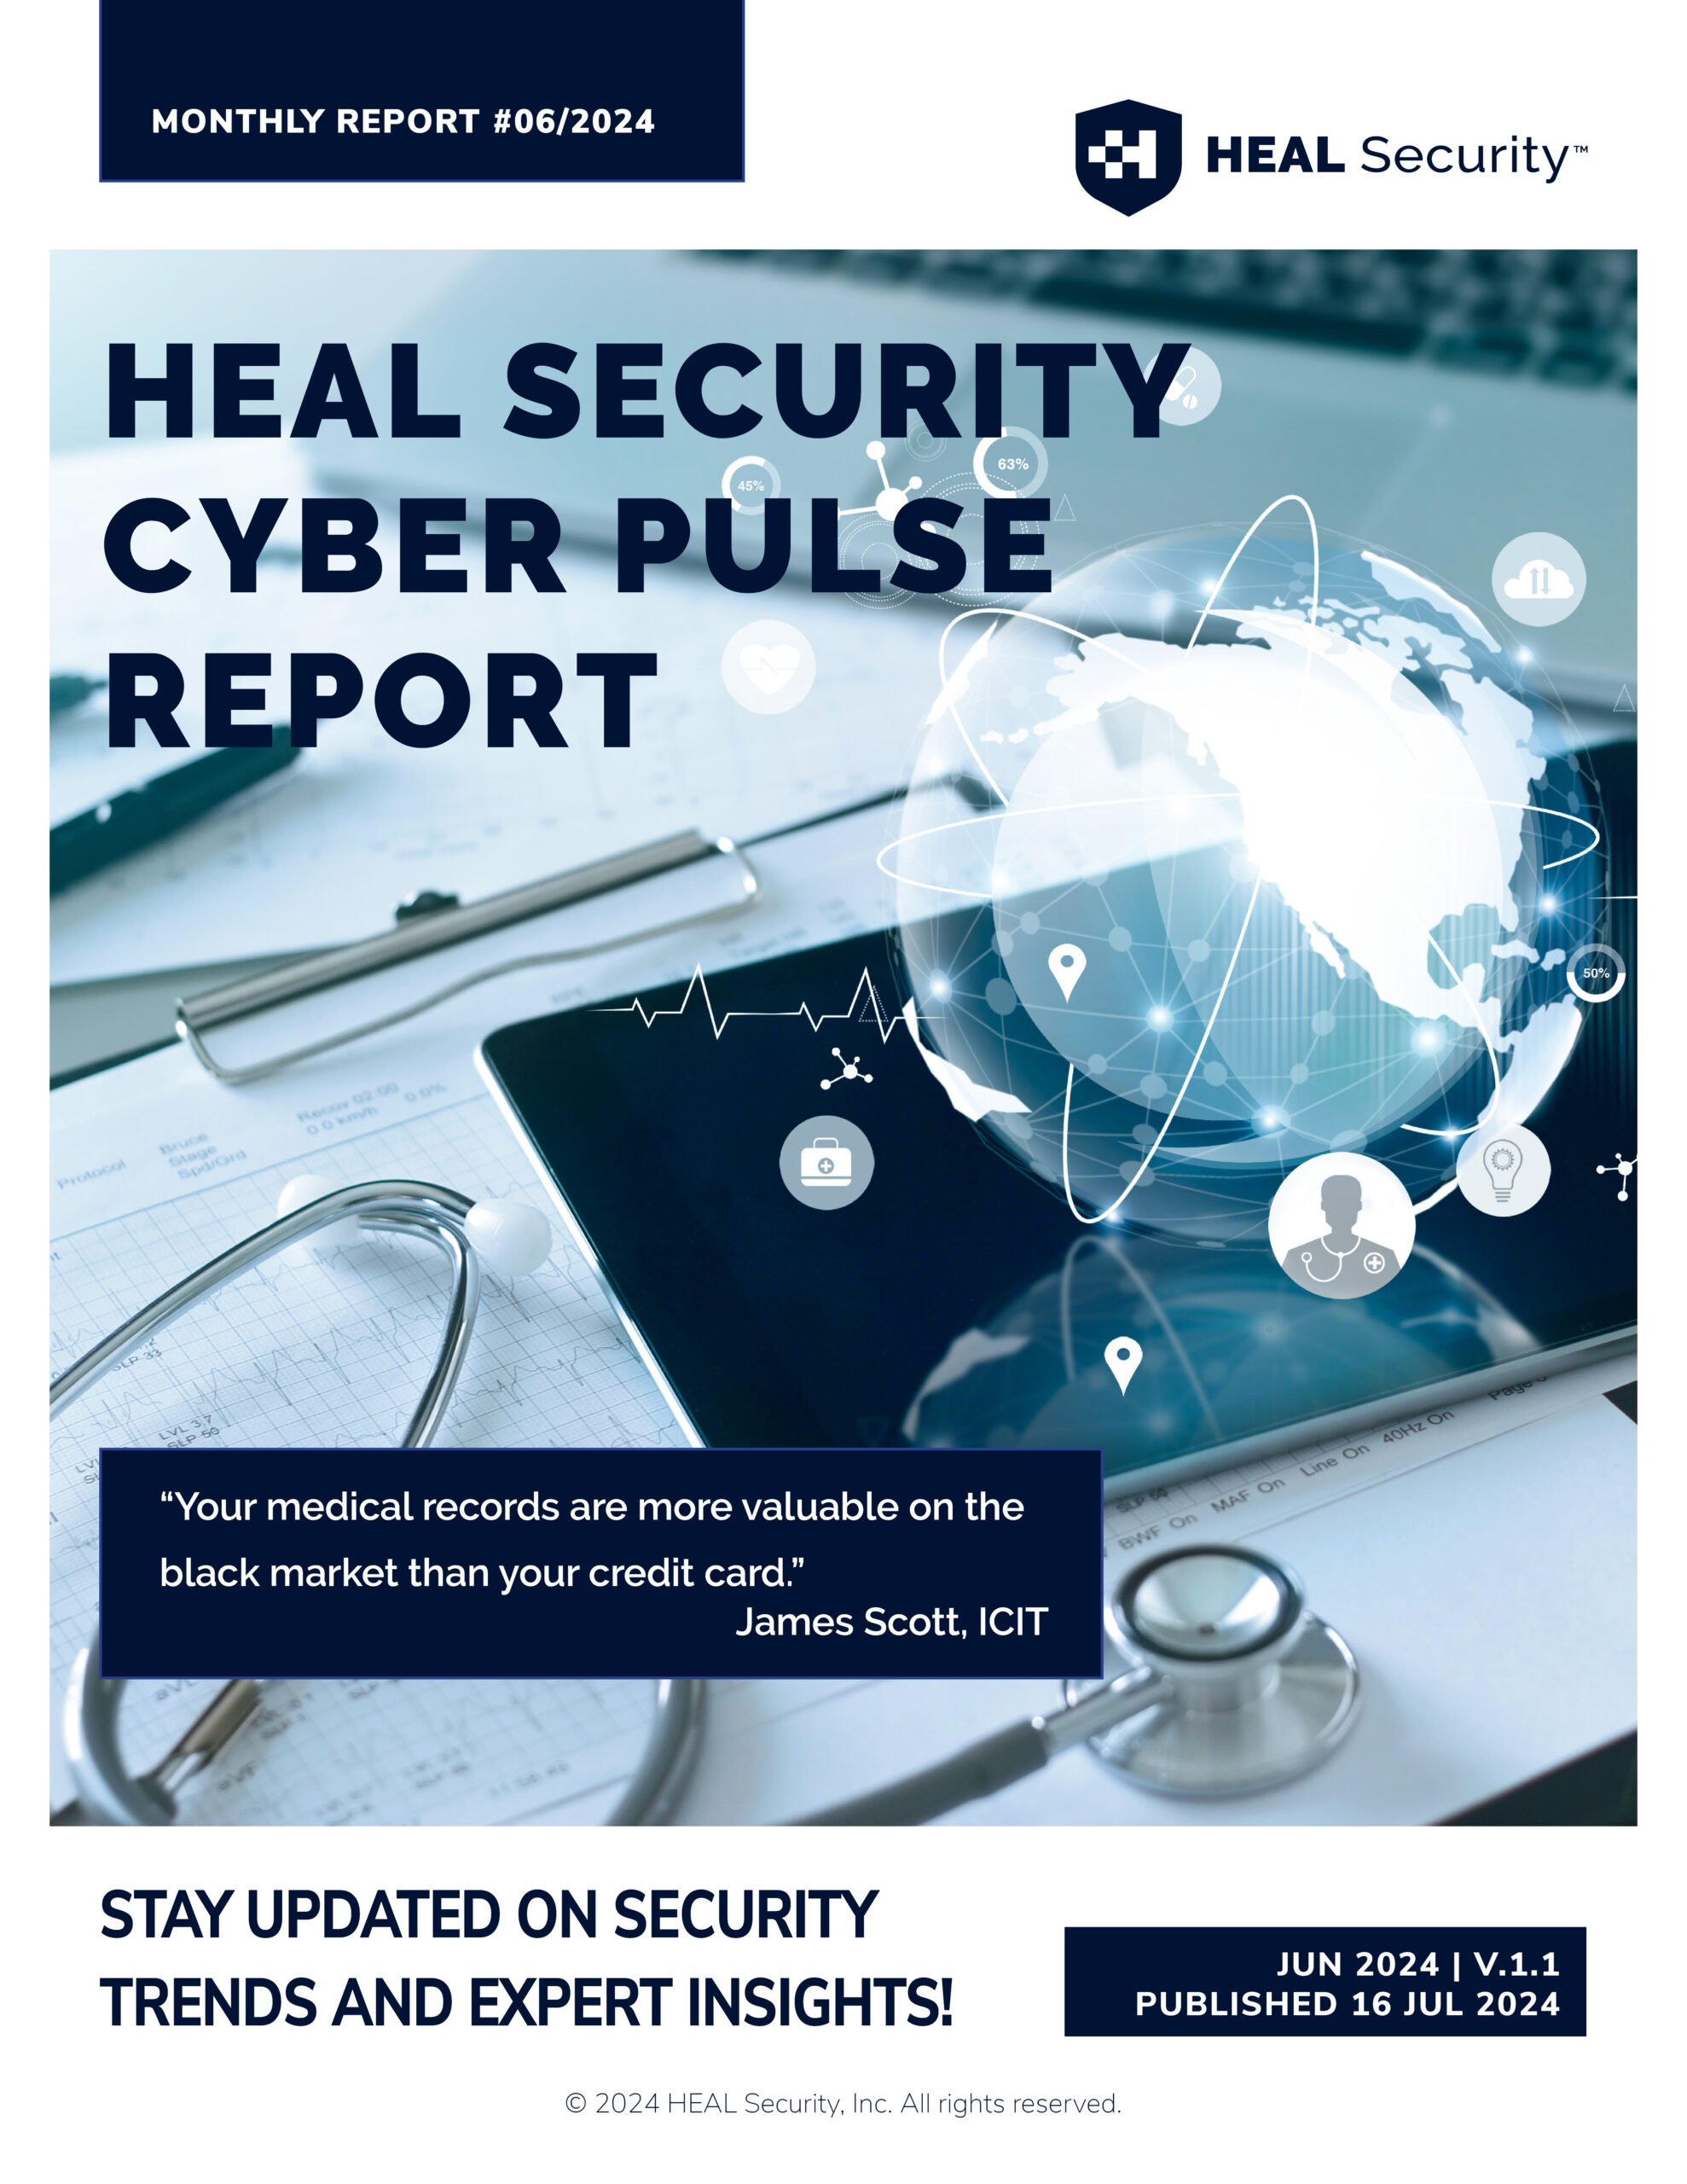 HEAL Security Cyber Pulse Report 06 2024 V1.1 page 1